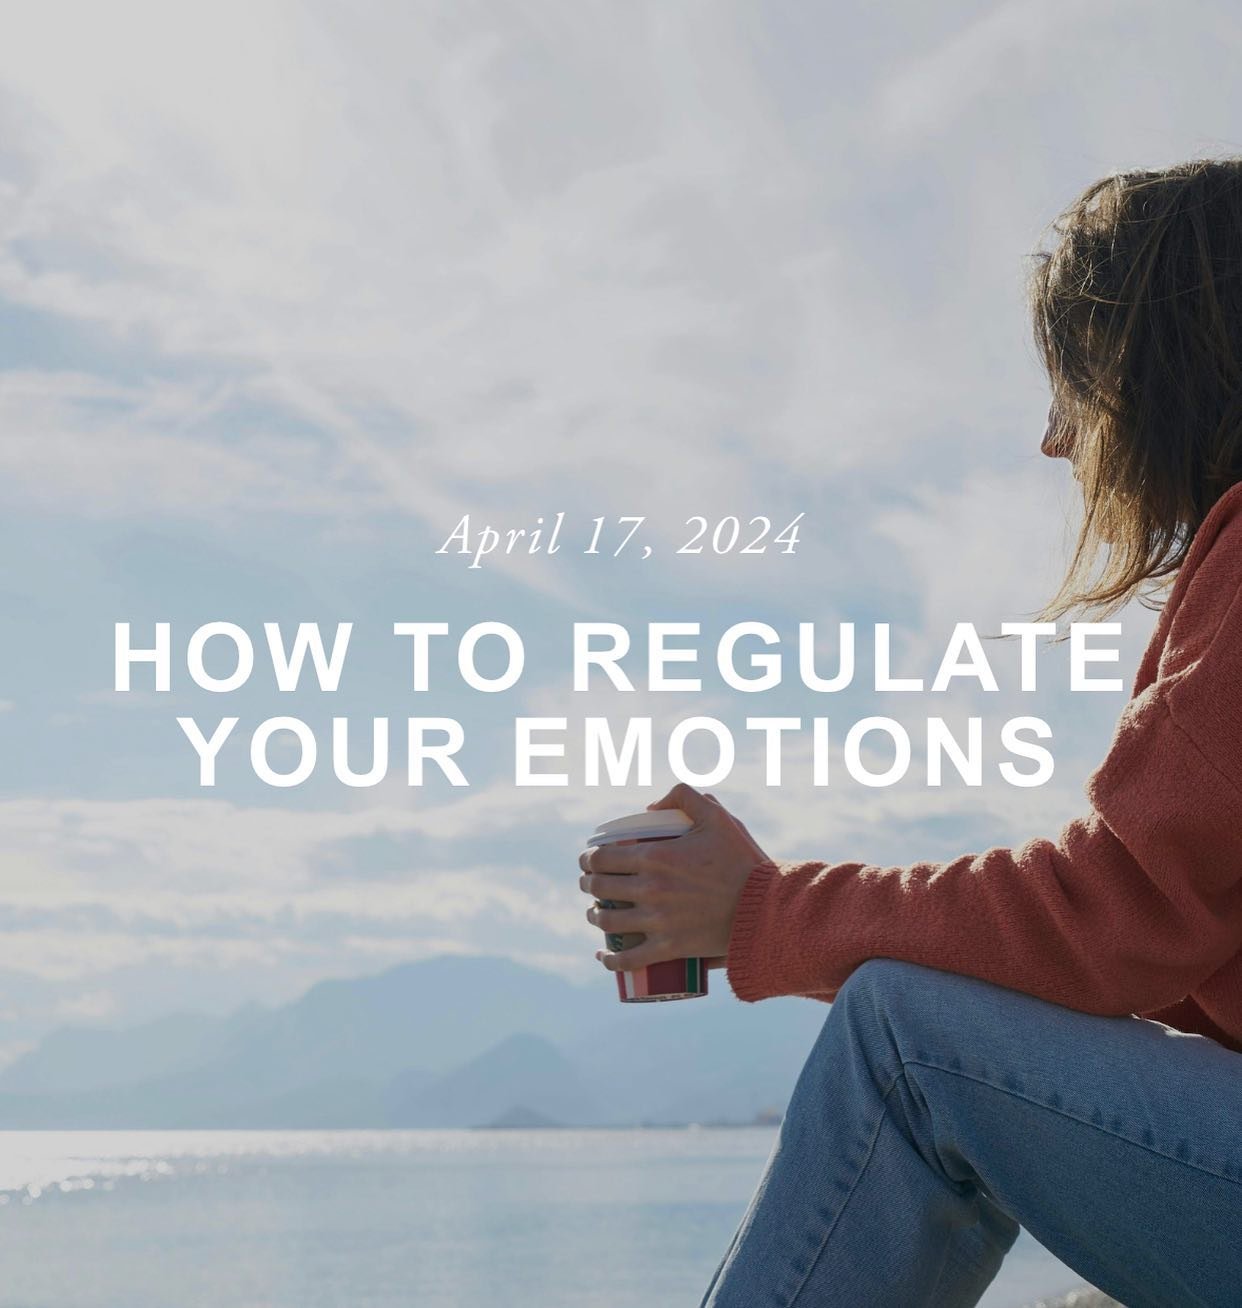 If you want to improve your emotional regulation, this is the blog for you!

&ldquo;If you have said or done something at one point in your life and regretted it, you may have done it in the heat of a moment where your emotions got the best of you. A